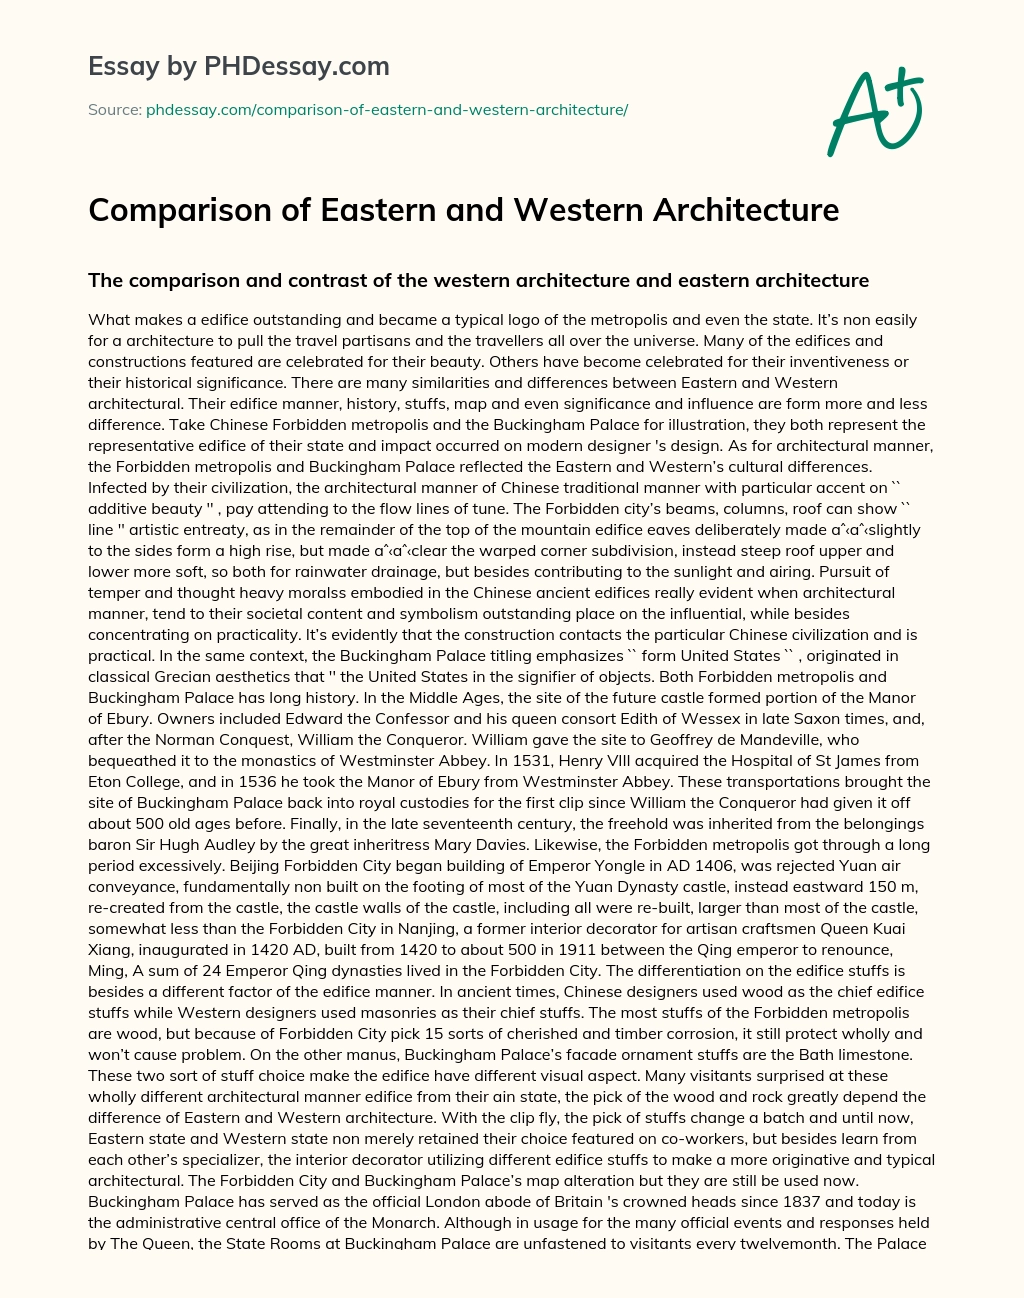 Comparison of Eastern and Western Architecture essay